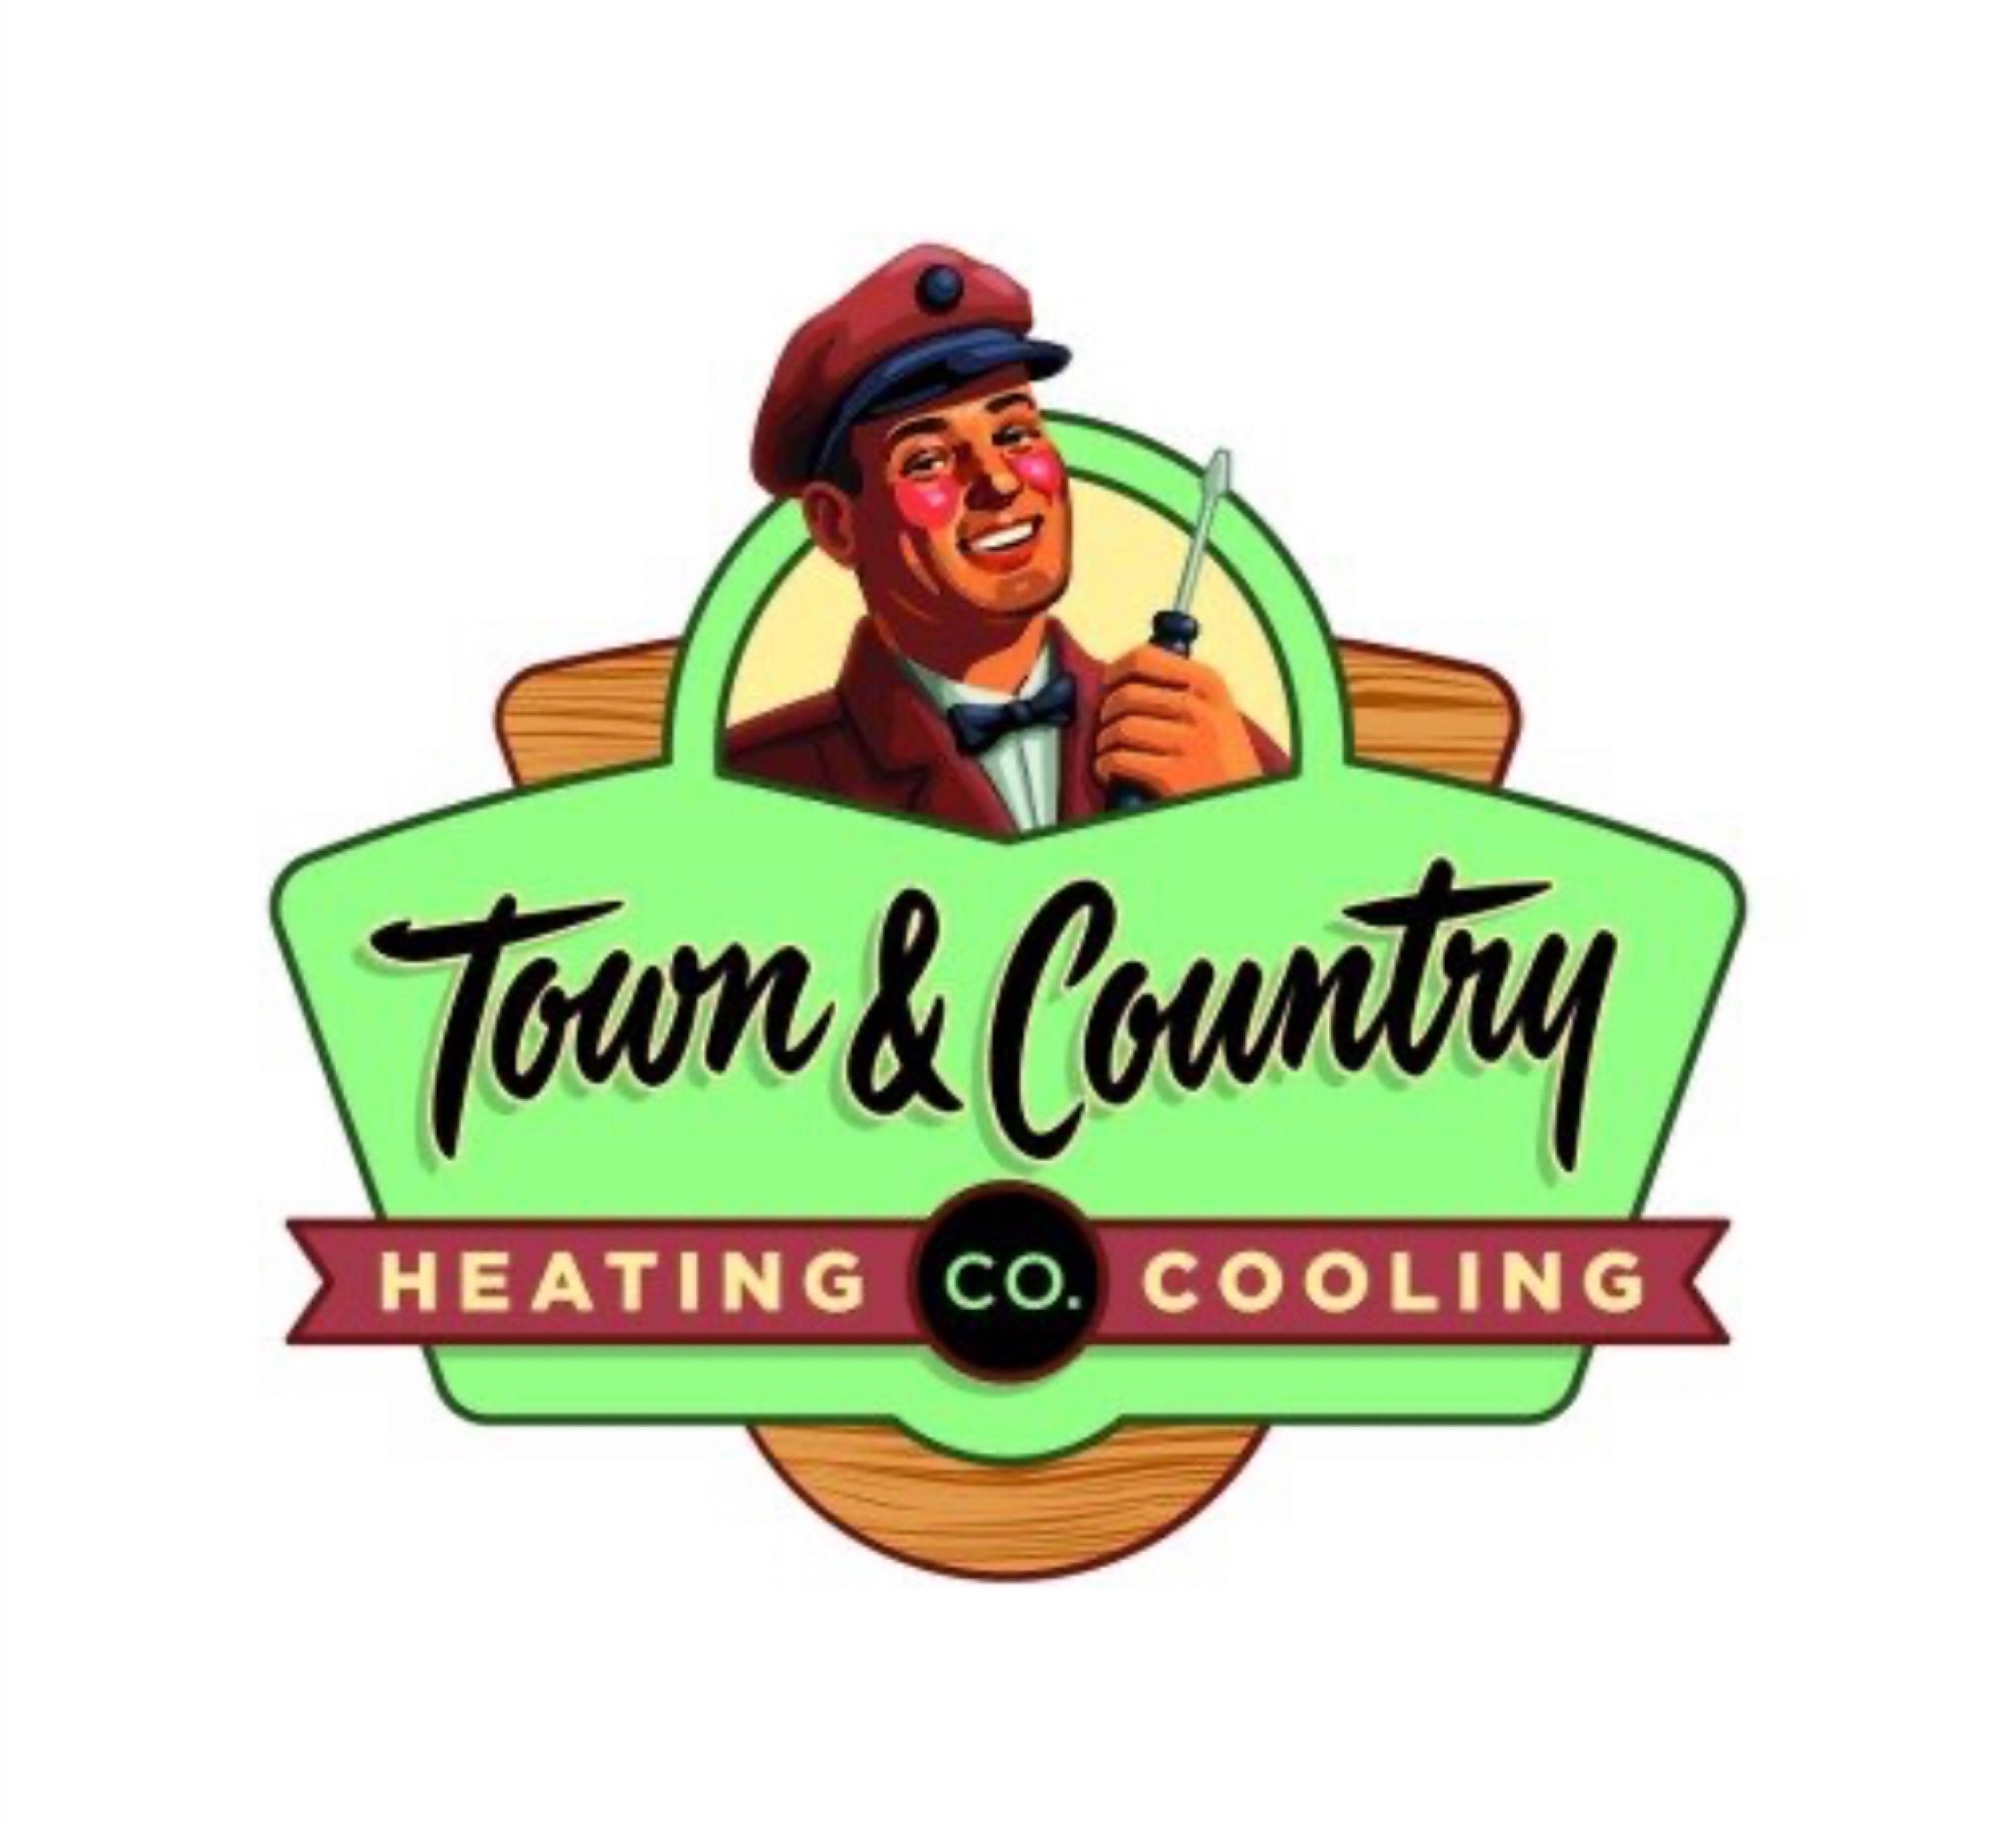 Town & Country Heating And Cooling, Co. Logo